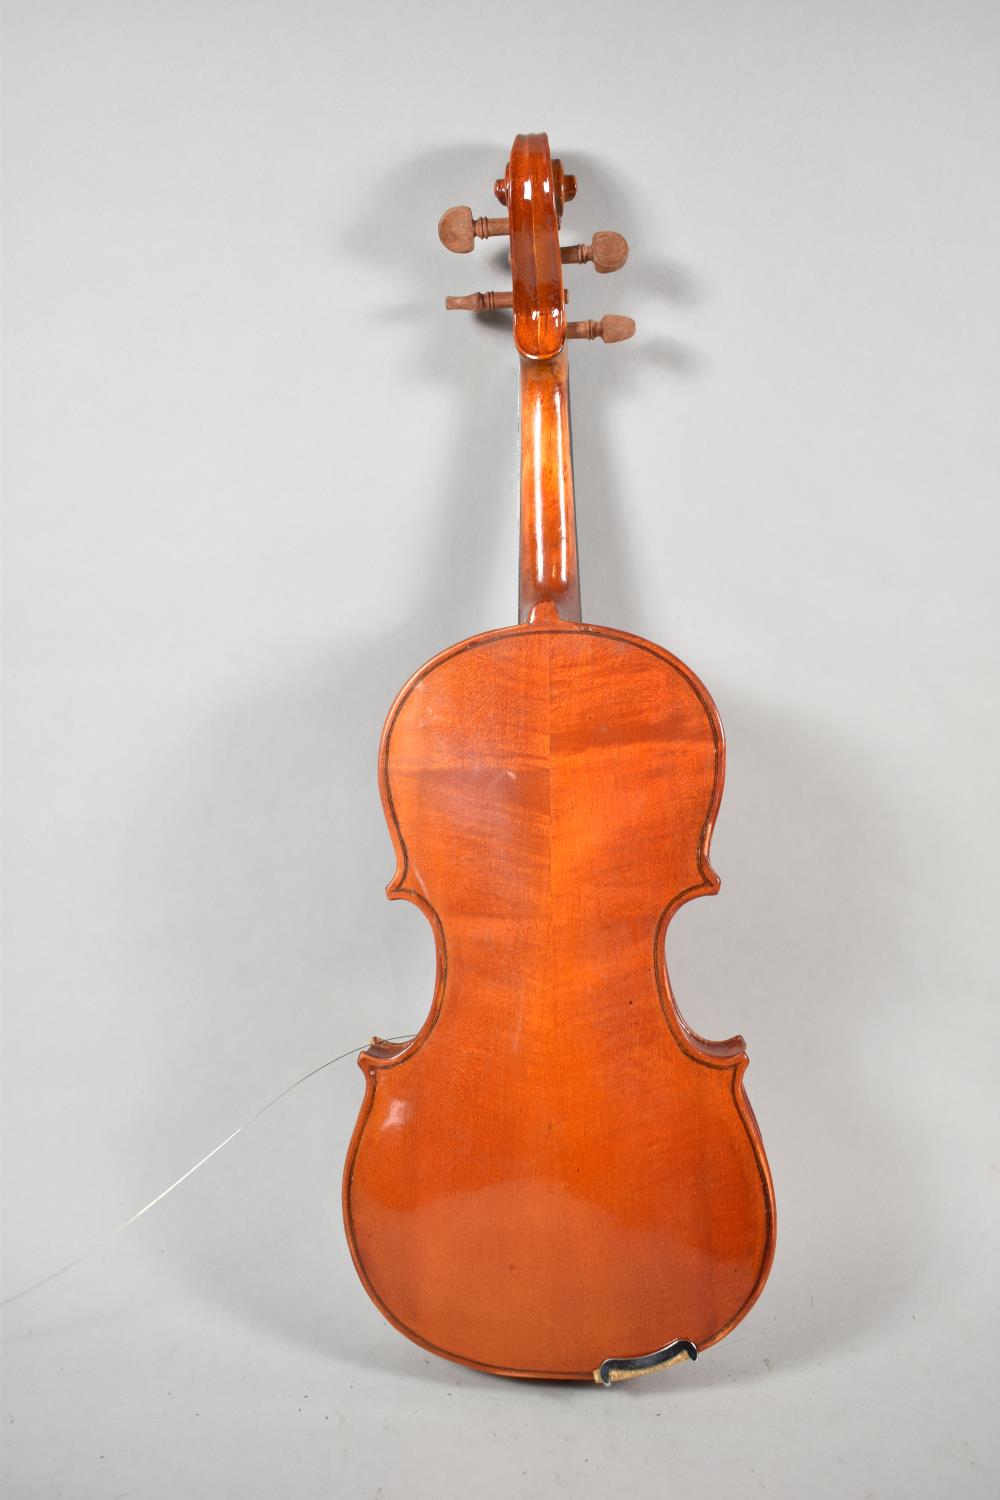 A Cased Stentor Child's Violin, the Stentor Student, Complete with Case and Bow - Image 3 of 9